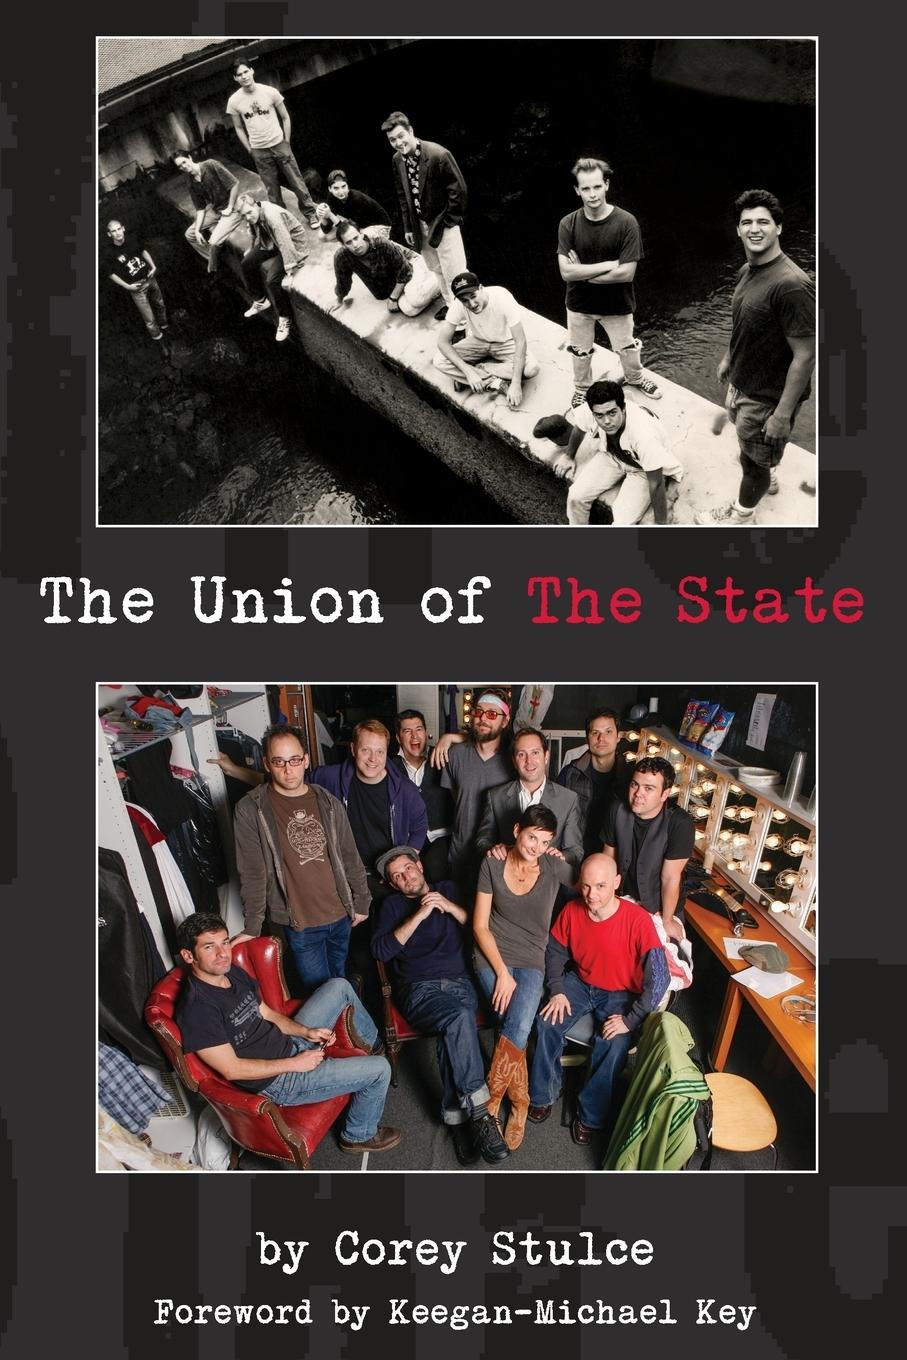 The Union of The State - Stulce, Corey